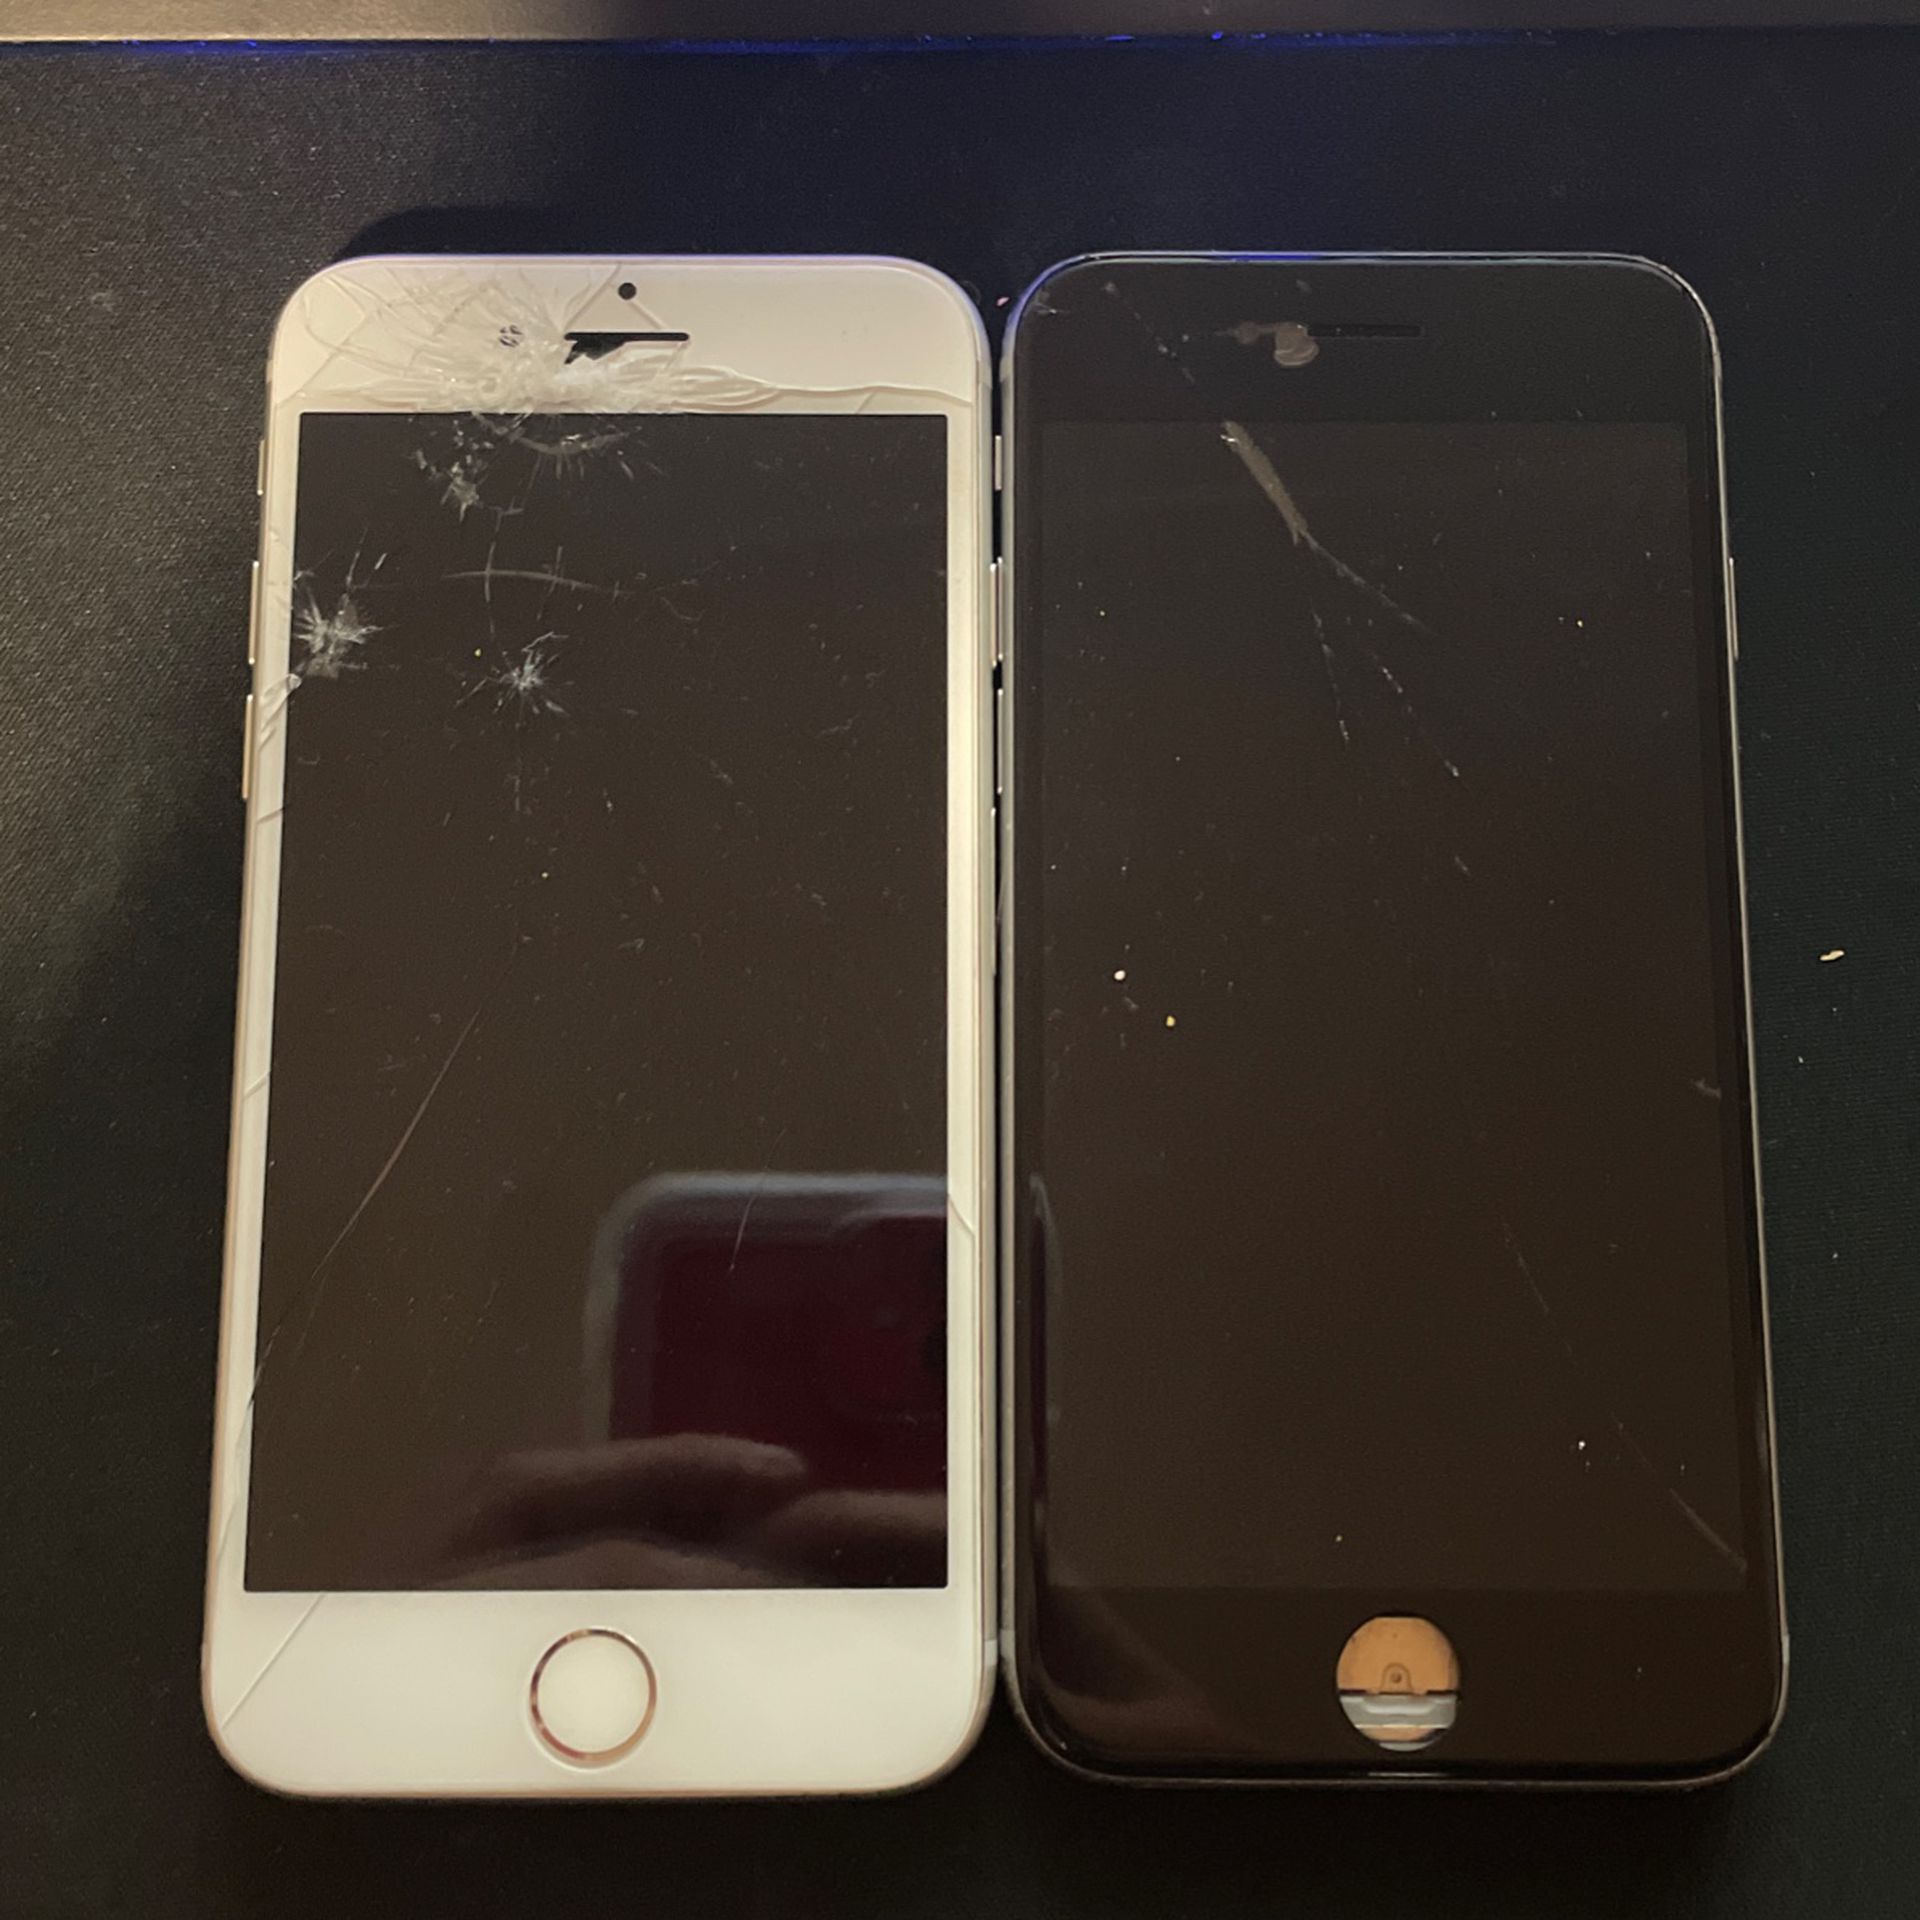 They Are Both Cracked But A Simple Screen Fix Will Fix It Only